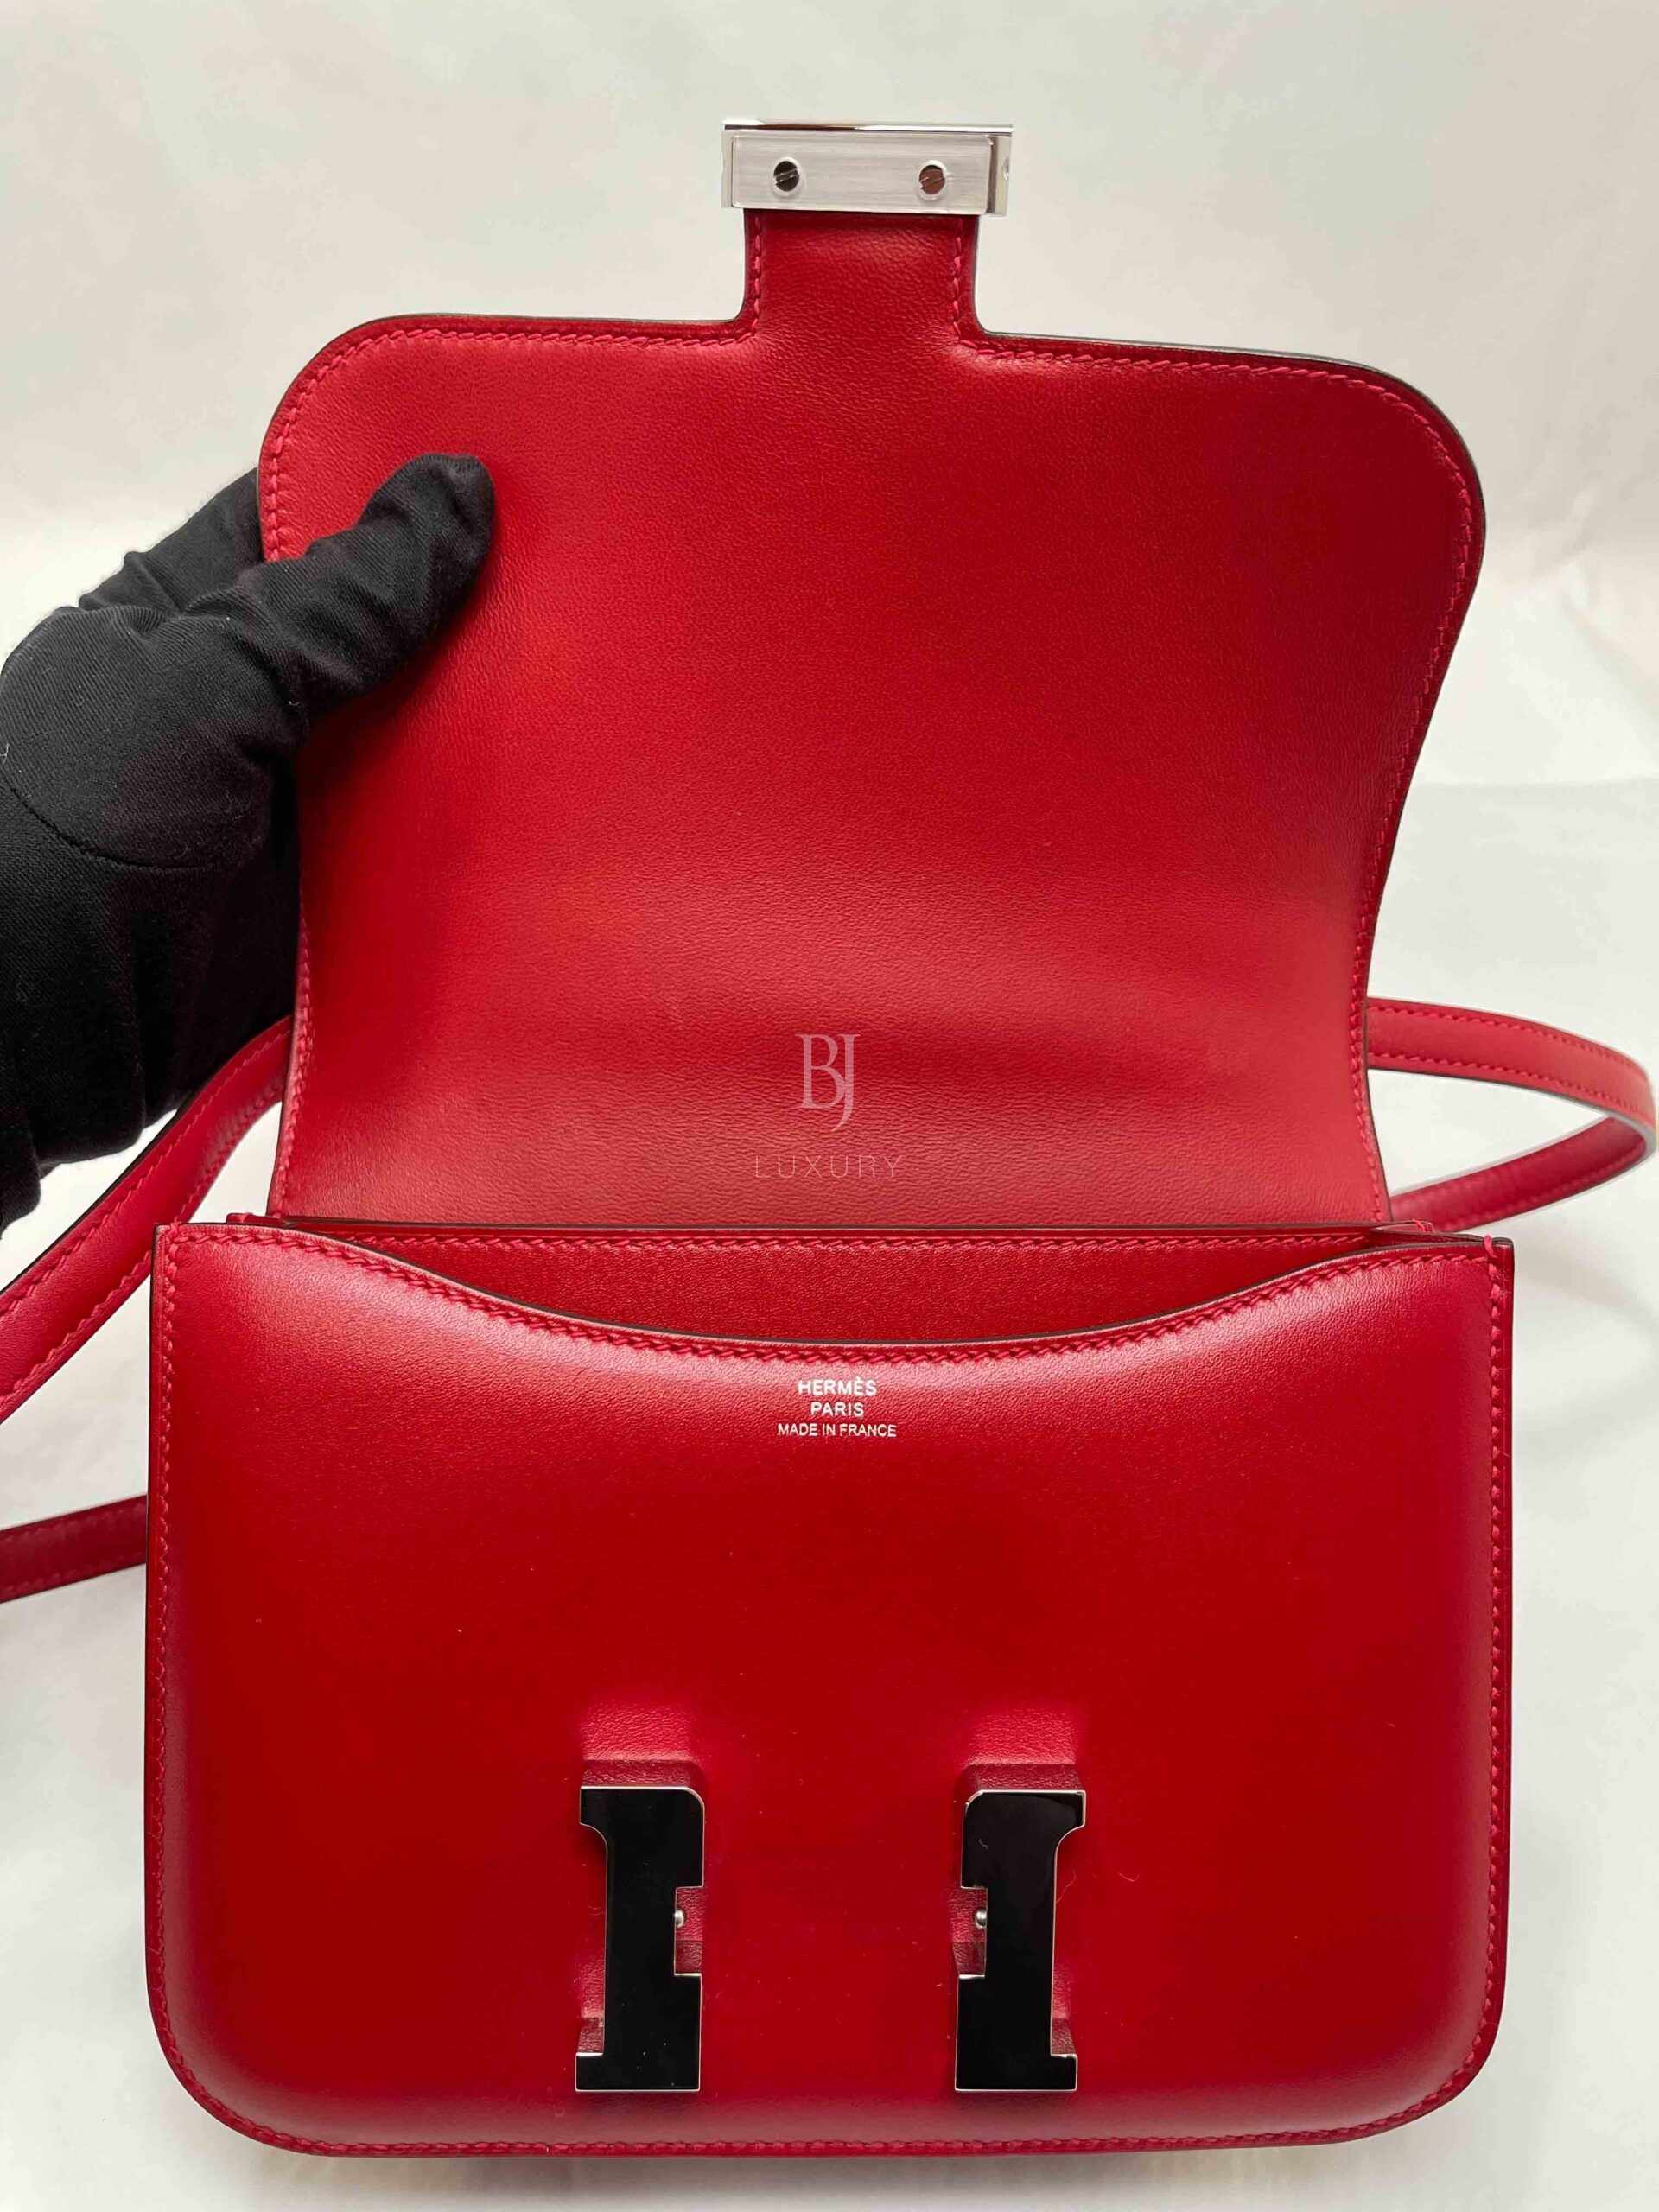 HERMES-CONSTANCE-18-ROUGECASAQUE-BOXCALF-Photo 3-9-22, 1 06 44 PM.jpg